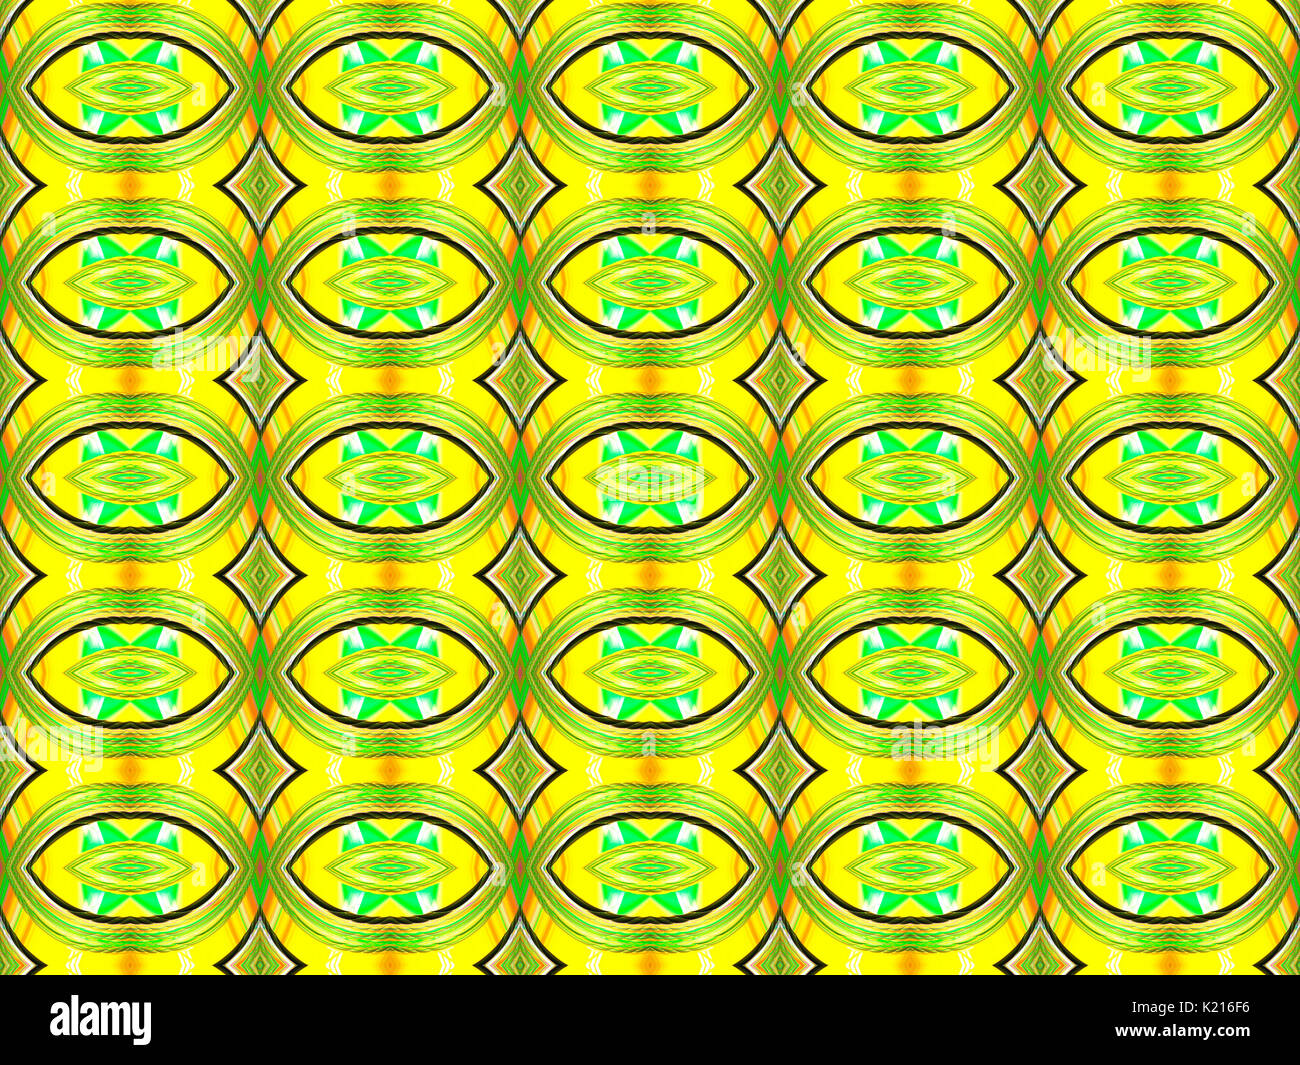 Oval and Diamond shapes in green and yellow - Wallpaper Pattern Stock Photo